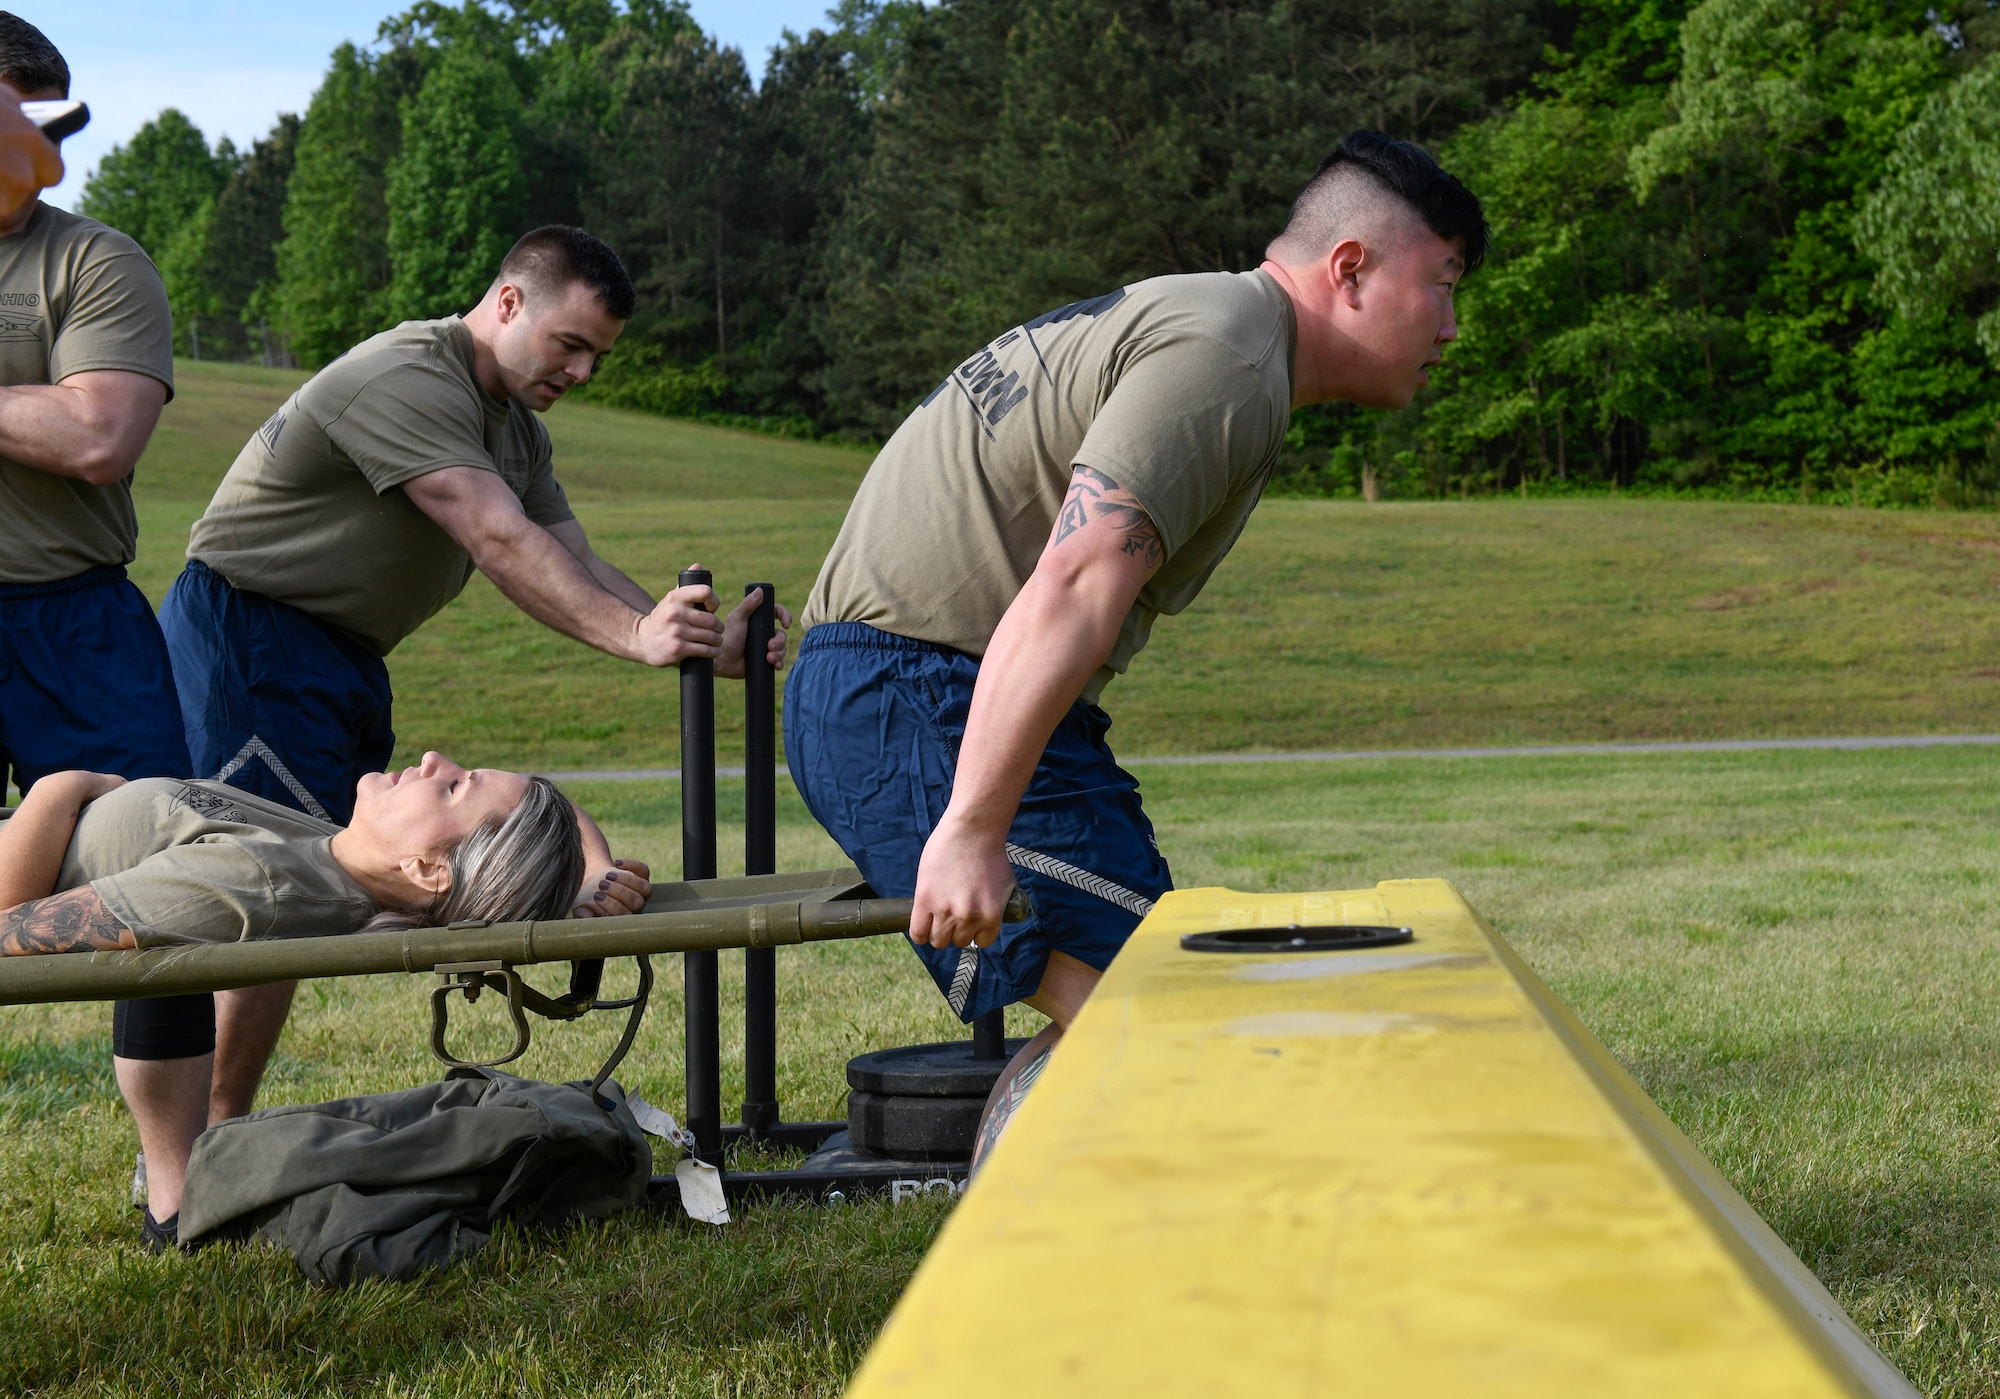 Master Sgt. Tae Choe, a ramp services supervisor assigned to the 76th Aerial Port Squadron, and Tech Sgt. Kyle Peirson, ramp services flight supervisor assigned to the 76th Aerial Port Squadron, carry Tech Sgt. Rebekah Sines, special handling section supervisor assigned to the 76th Aerial Port Squadron, during the fitness competition at the Port Dawg Challenge April 24, 2019, at Dobbins Air Reserve Base, Georgia.